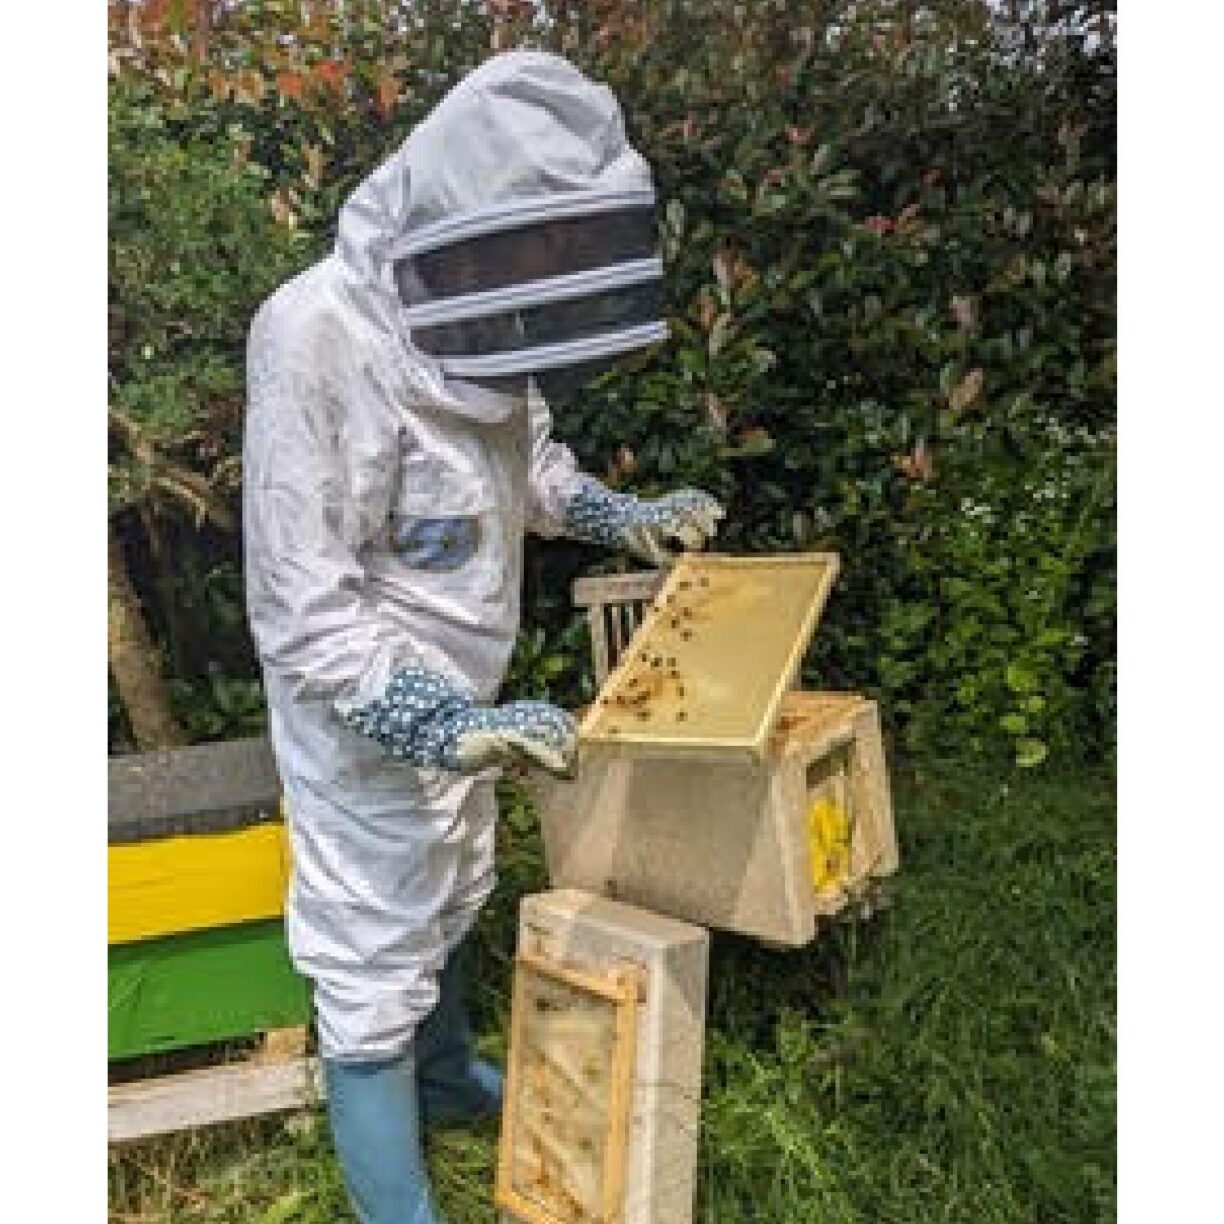 Beekeeper at work with a hive